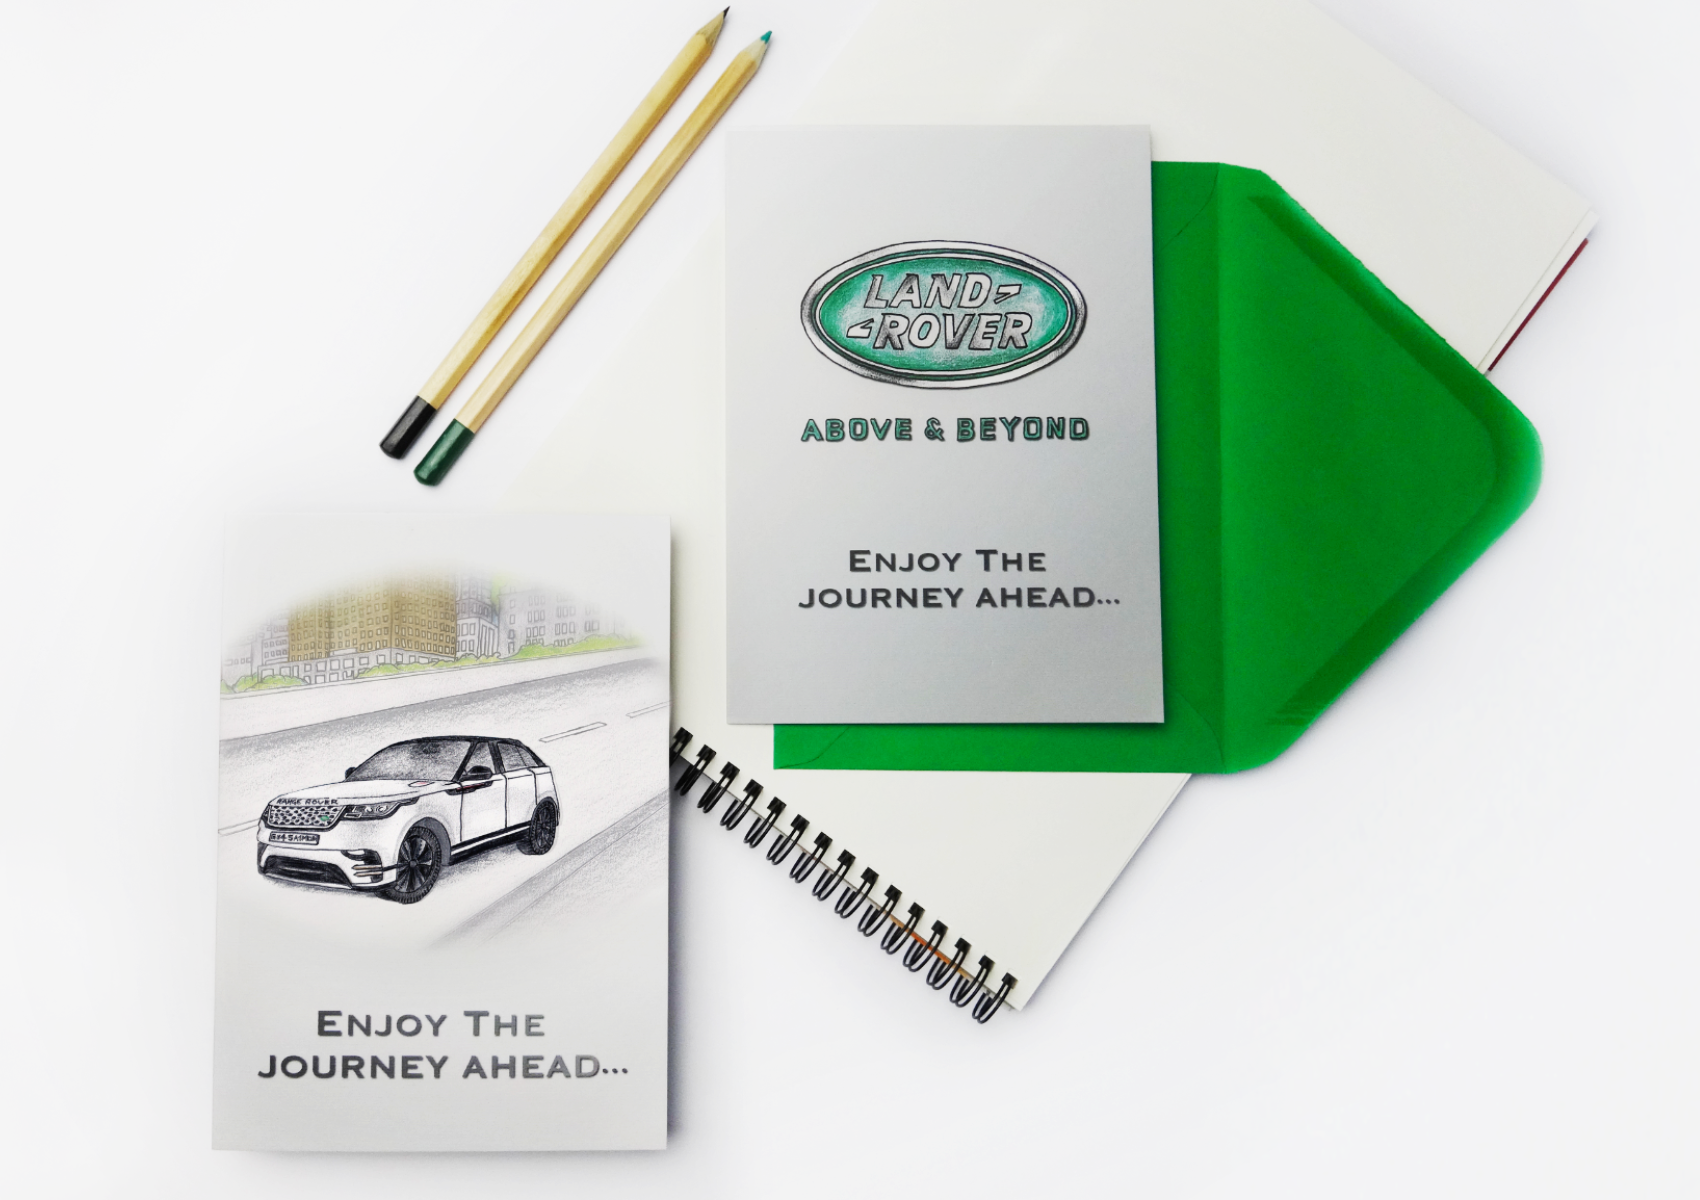 Two company greeting cards for Land Rover car dealership, featuring bespoke illustrations of a Land Rover Velar and the Land Rover logo.